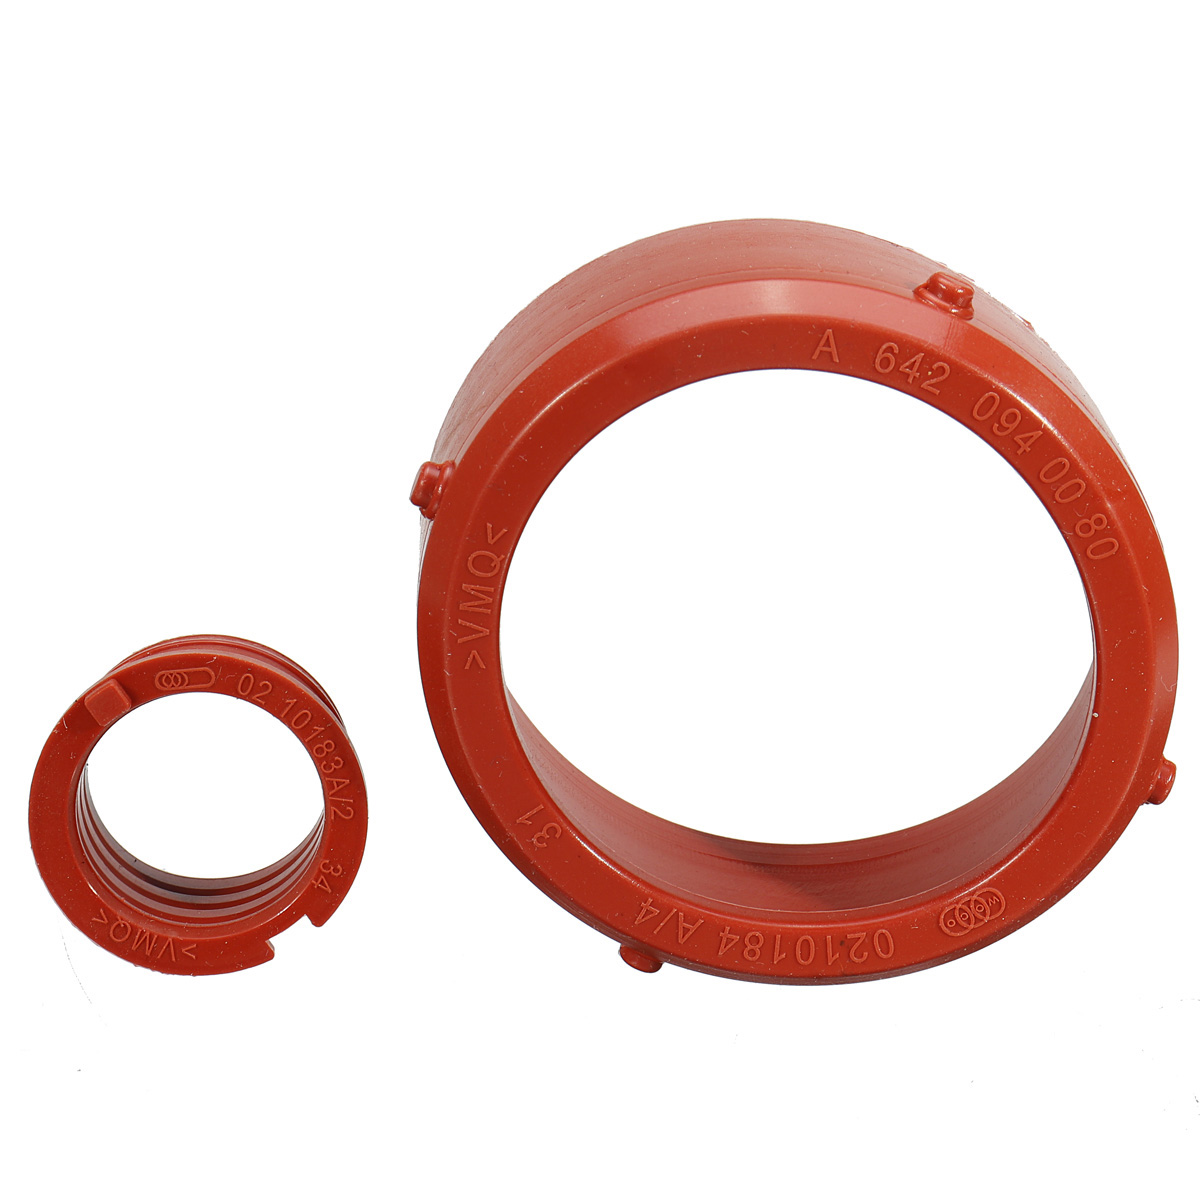 2pcs Car engine A6420940080 Turbo Intake Seal & Engine Breather Seal Kit for Mercedes-Benz OM642 Engines Engine Accessories